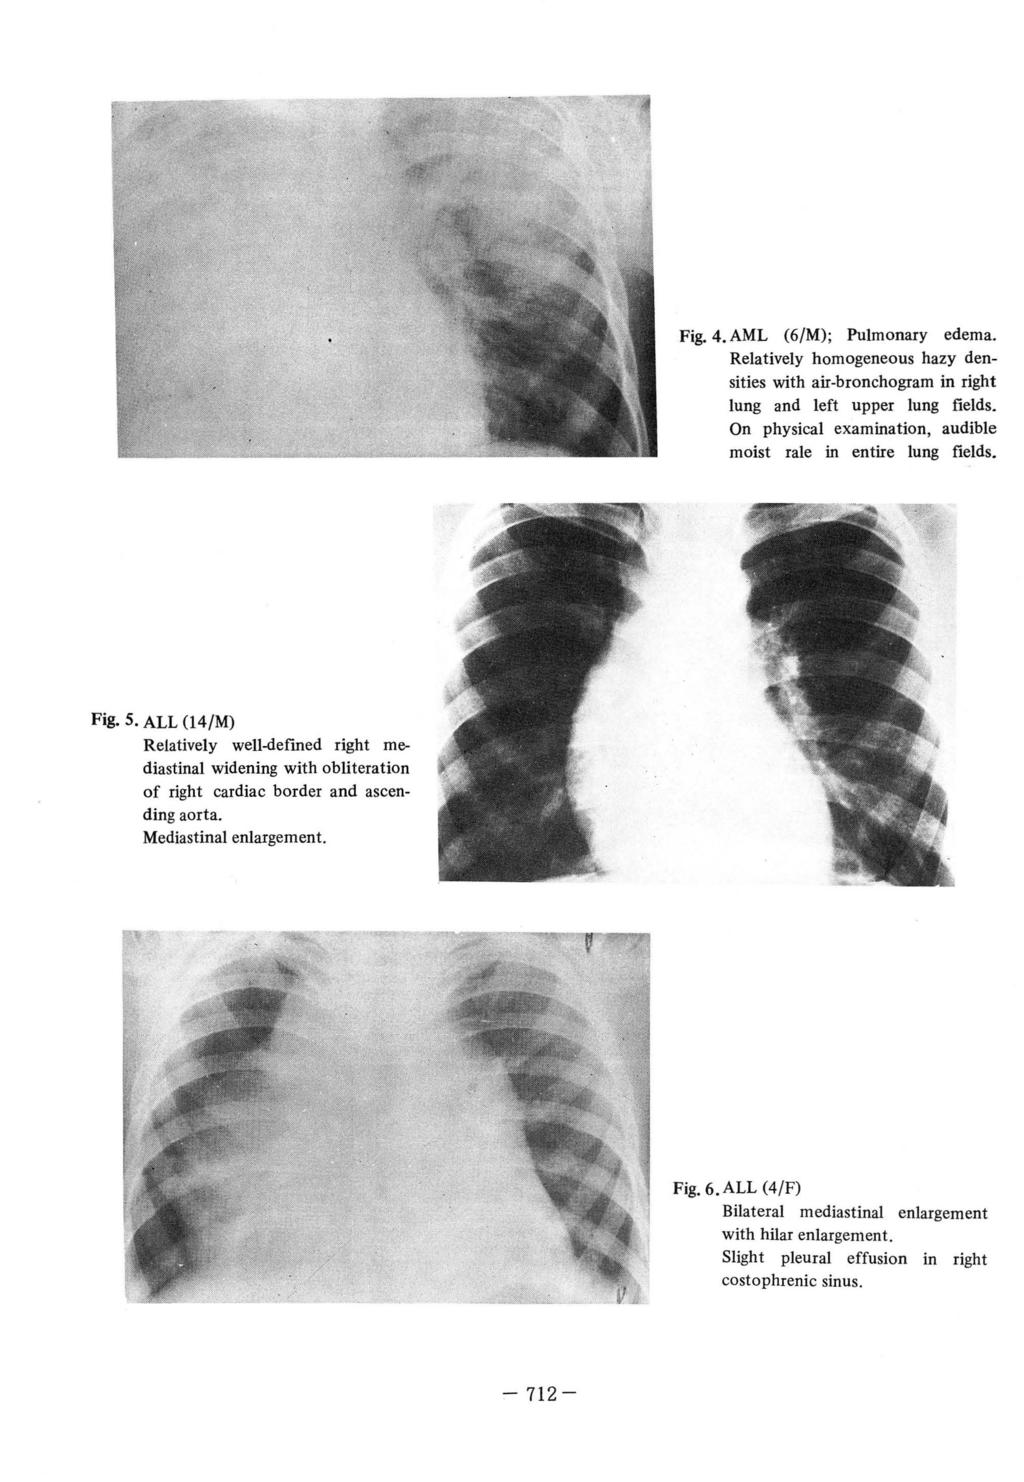 Fig. 4. AML (6/M); Pulmonary edema. Relatively homogeneous hazy densities with air-bronchogram in right lung and left upper lung fields.